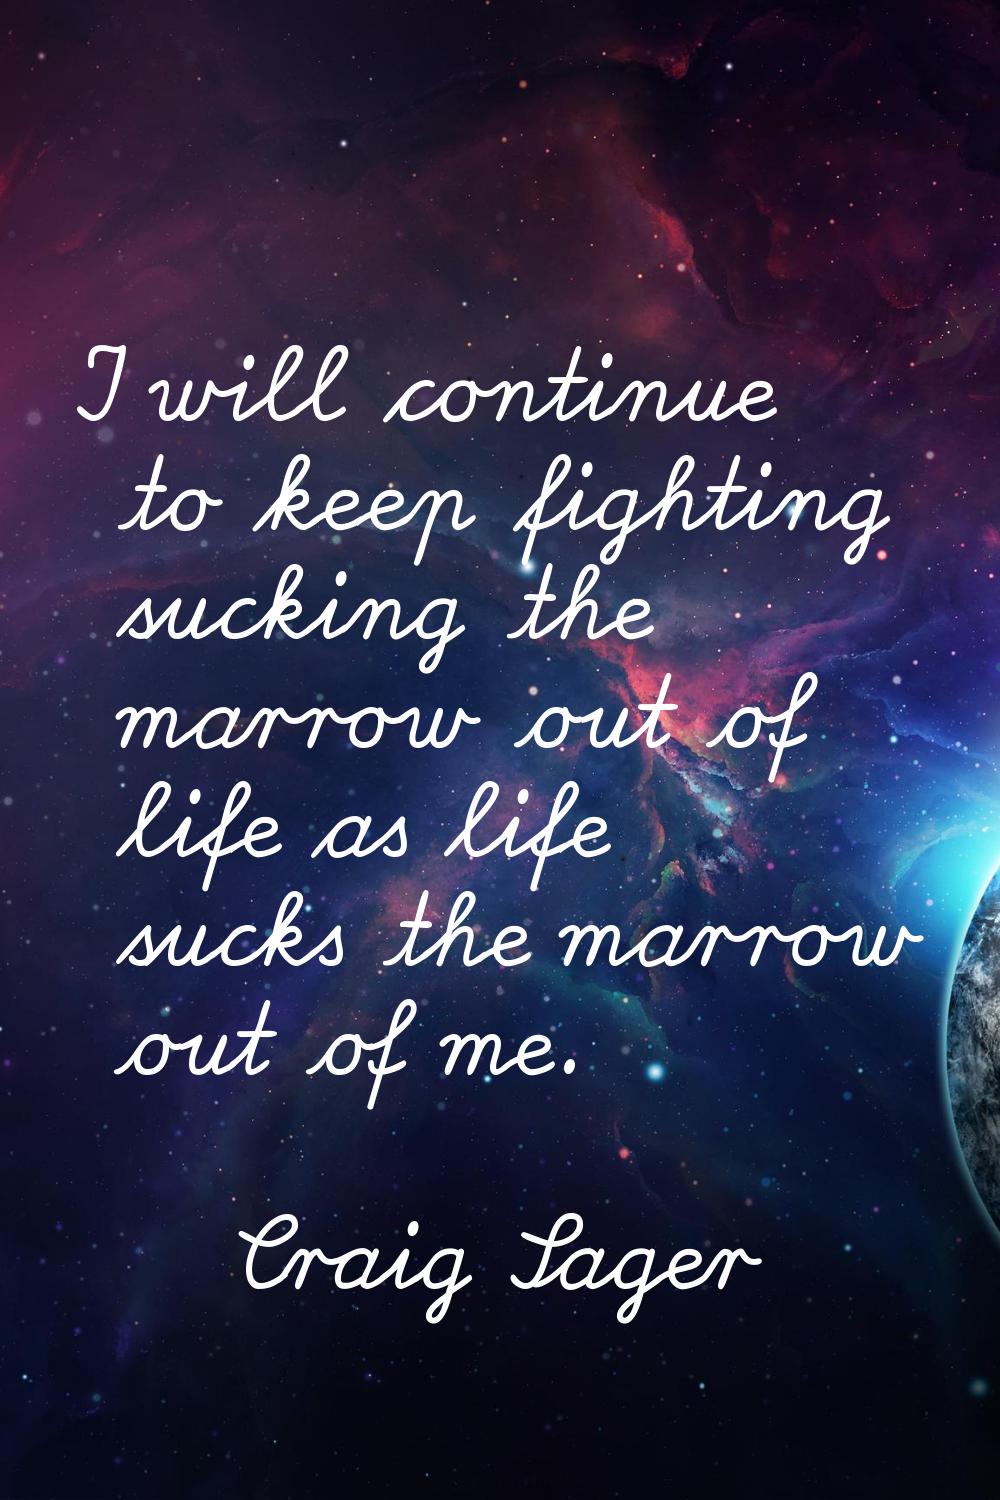 I will continue to keep fighting sucking the marrow out of life as life sucks the marrow out of me.